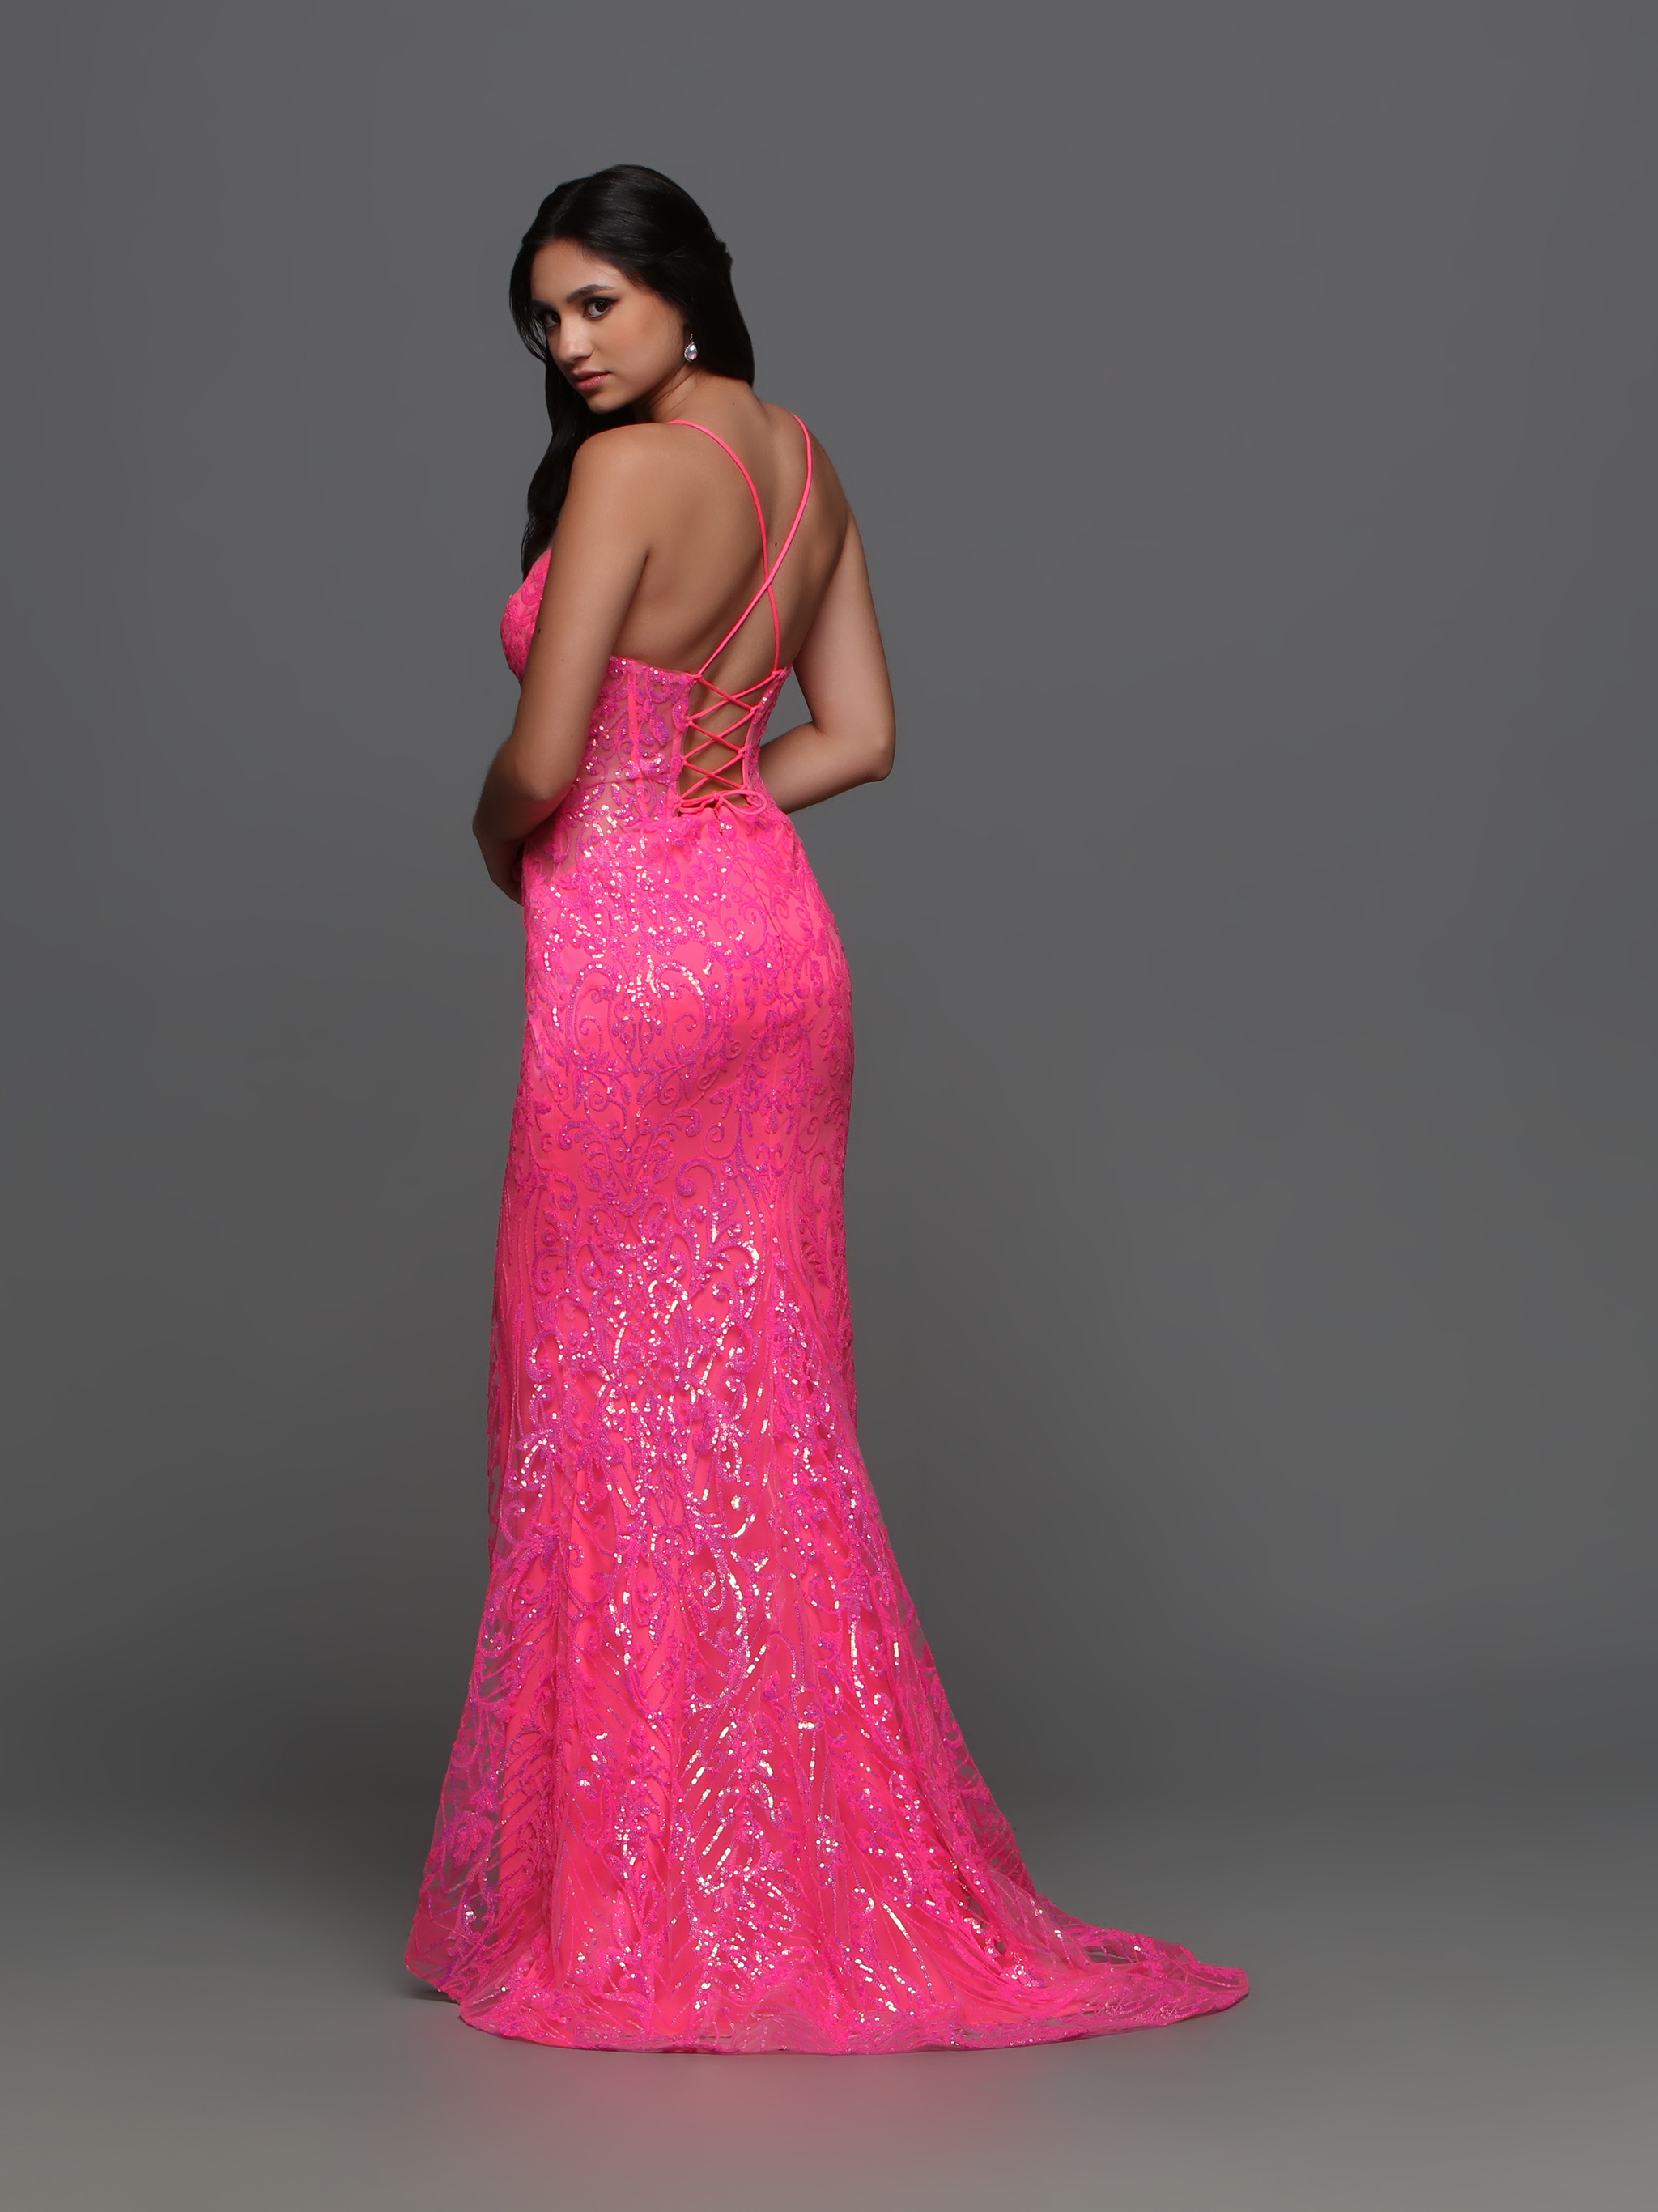 Image showing back view of style #72311